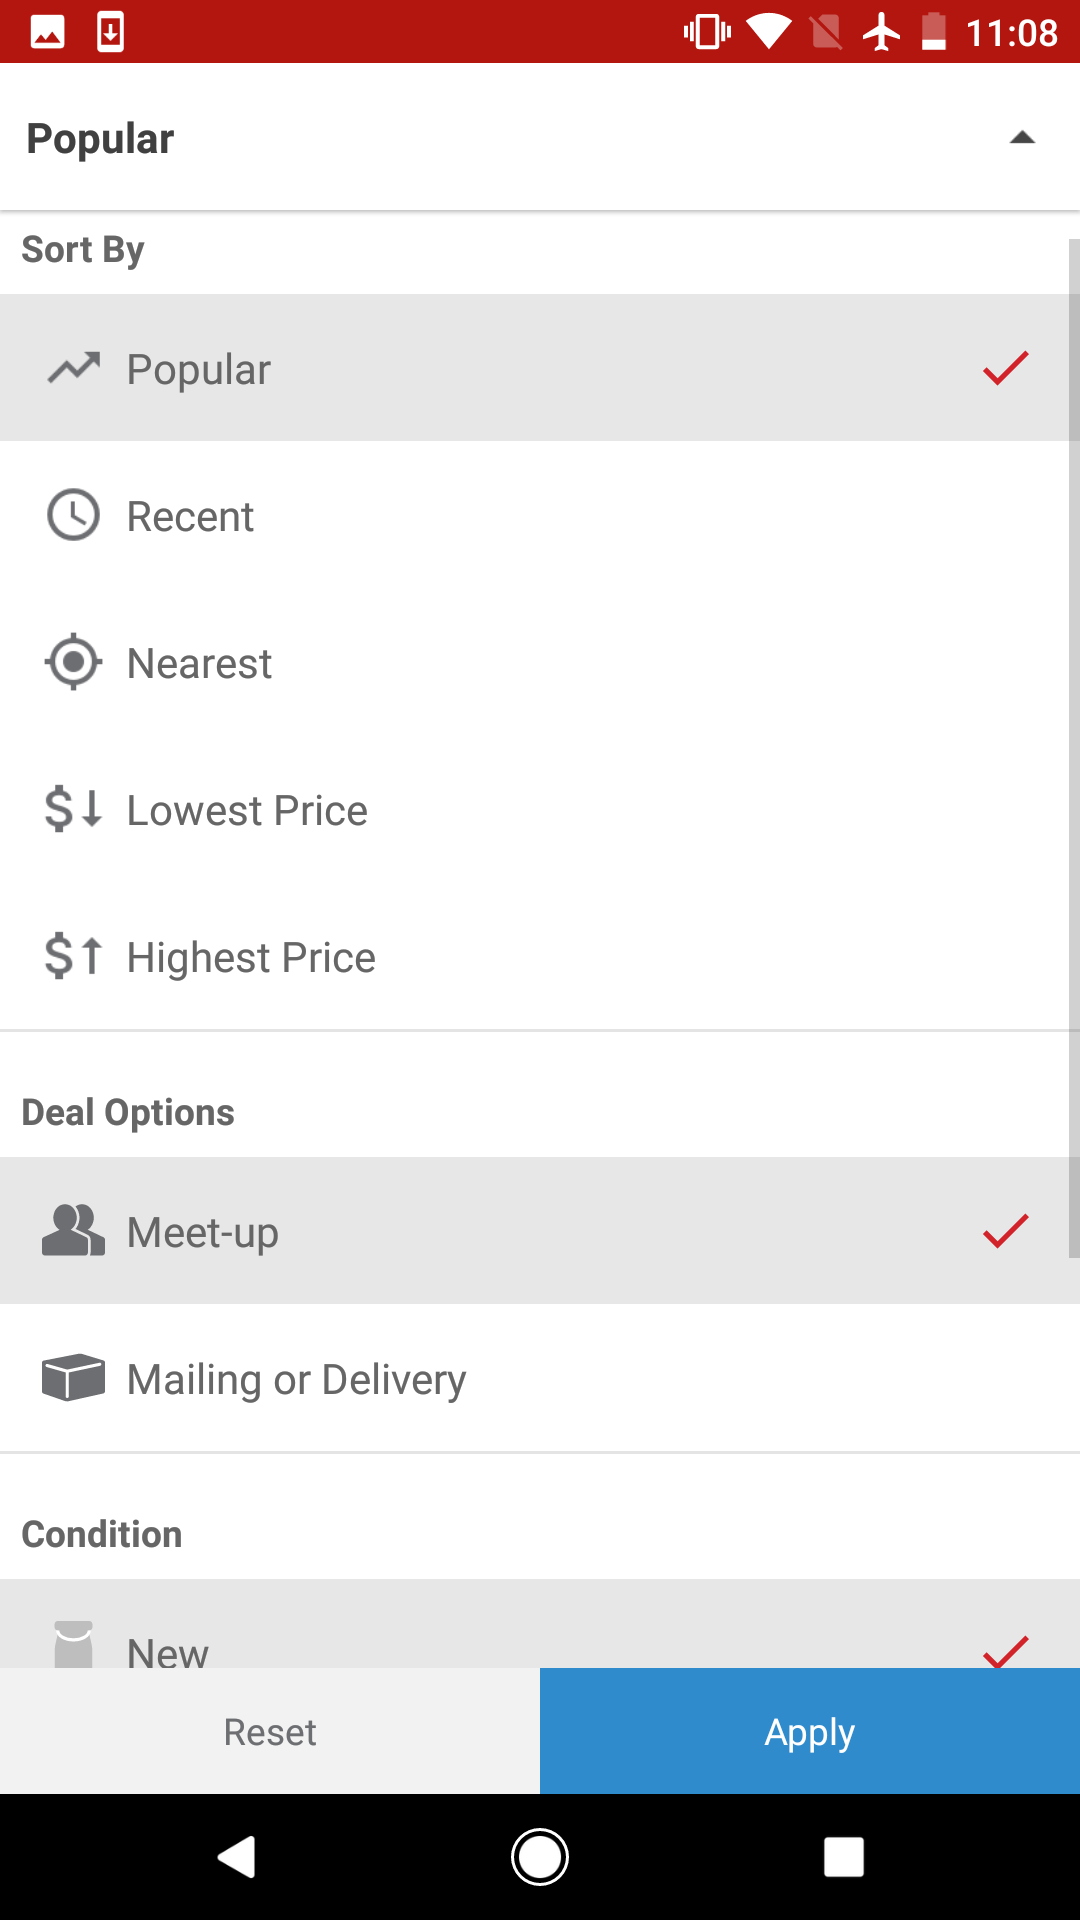 Sort by Popular, Recent, Price, Location on Carousell for Android